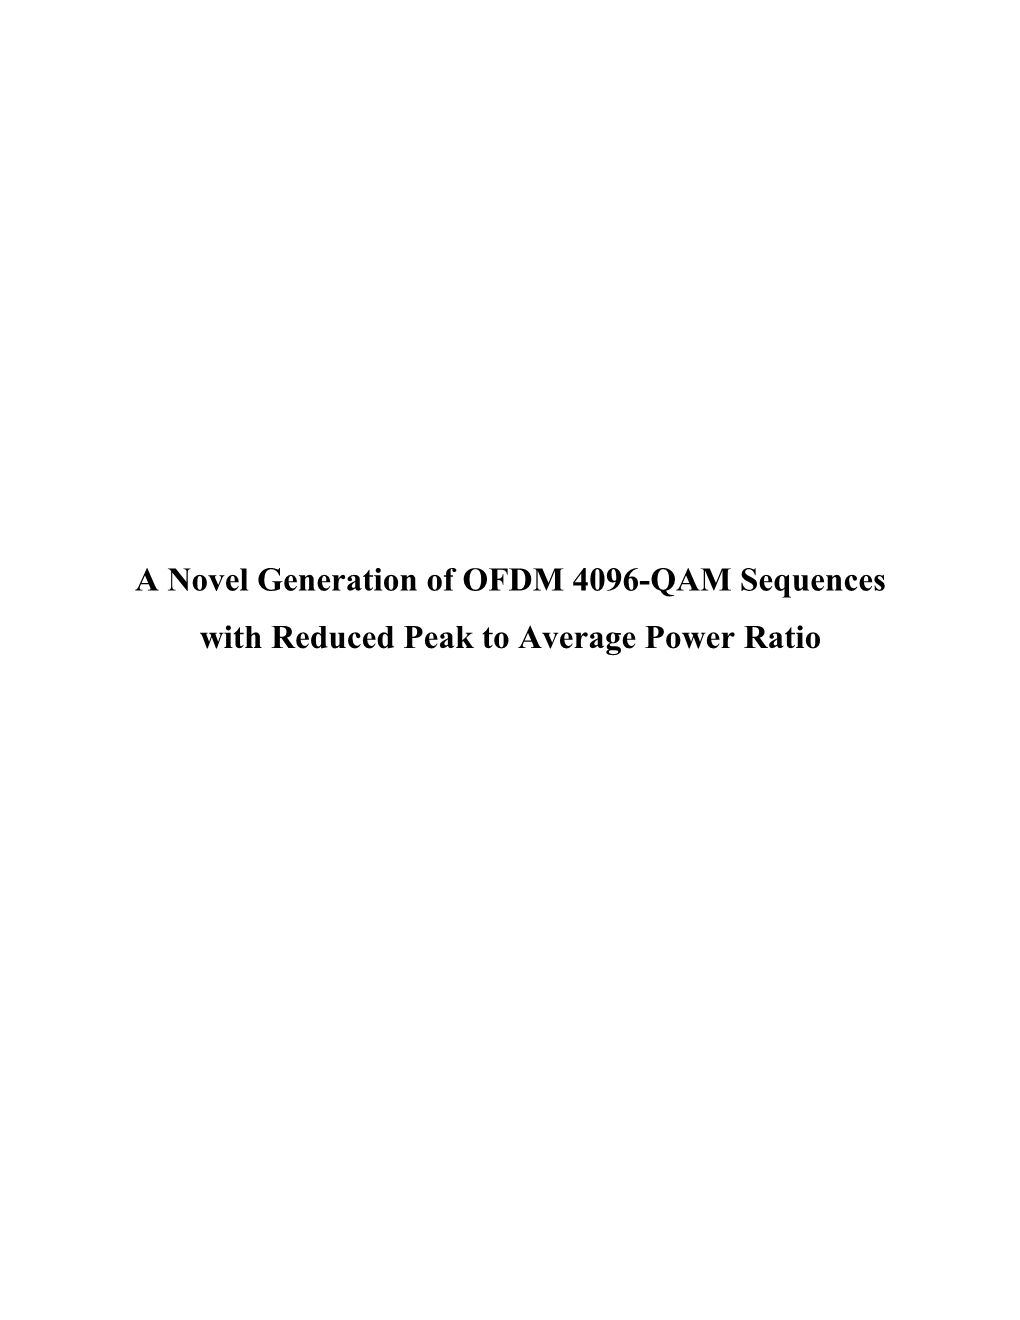 A Novel Generation of OFDM 4096-QAM Sequences with Reduced Peak to Average Power Ratio